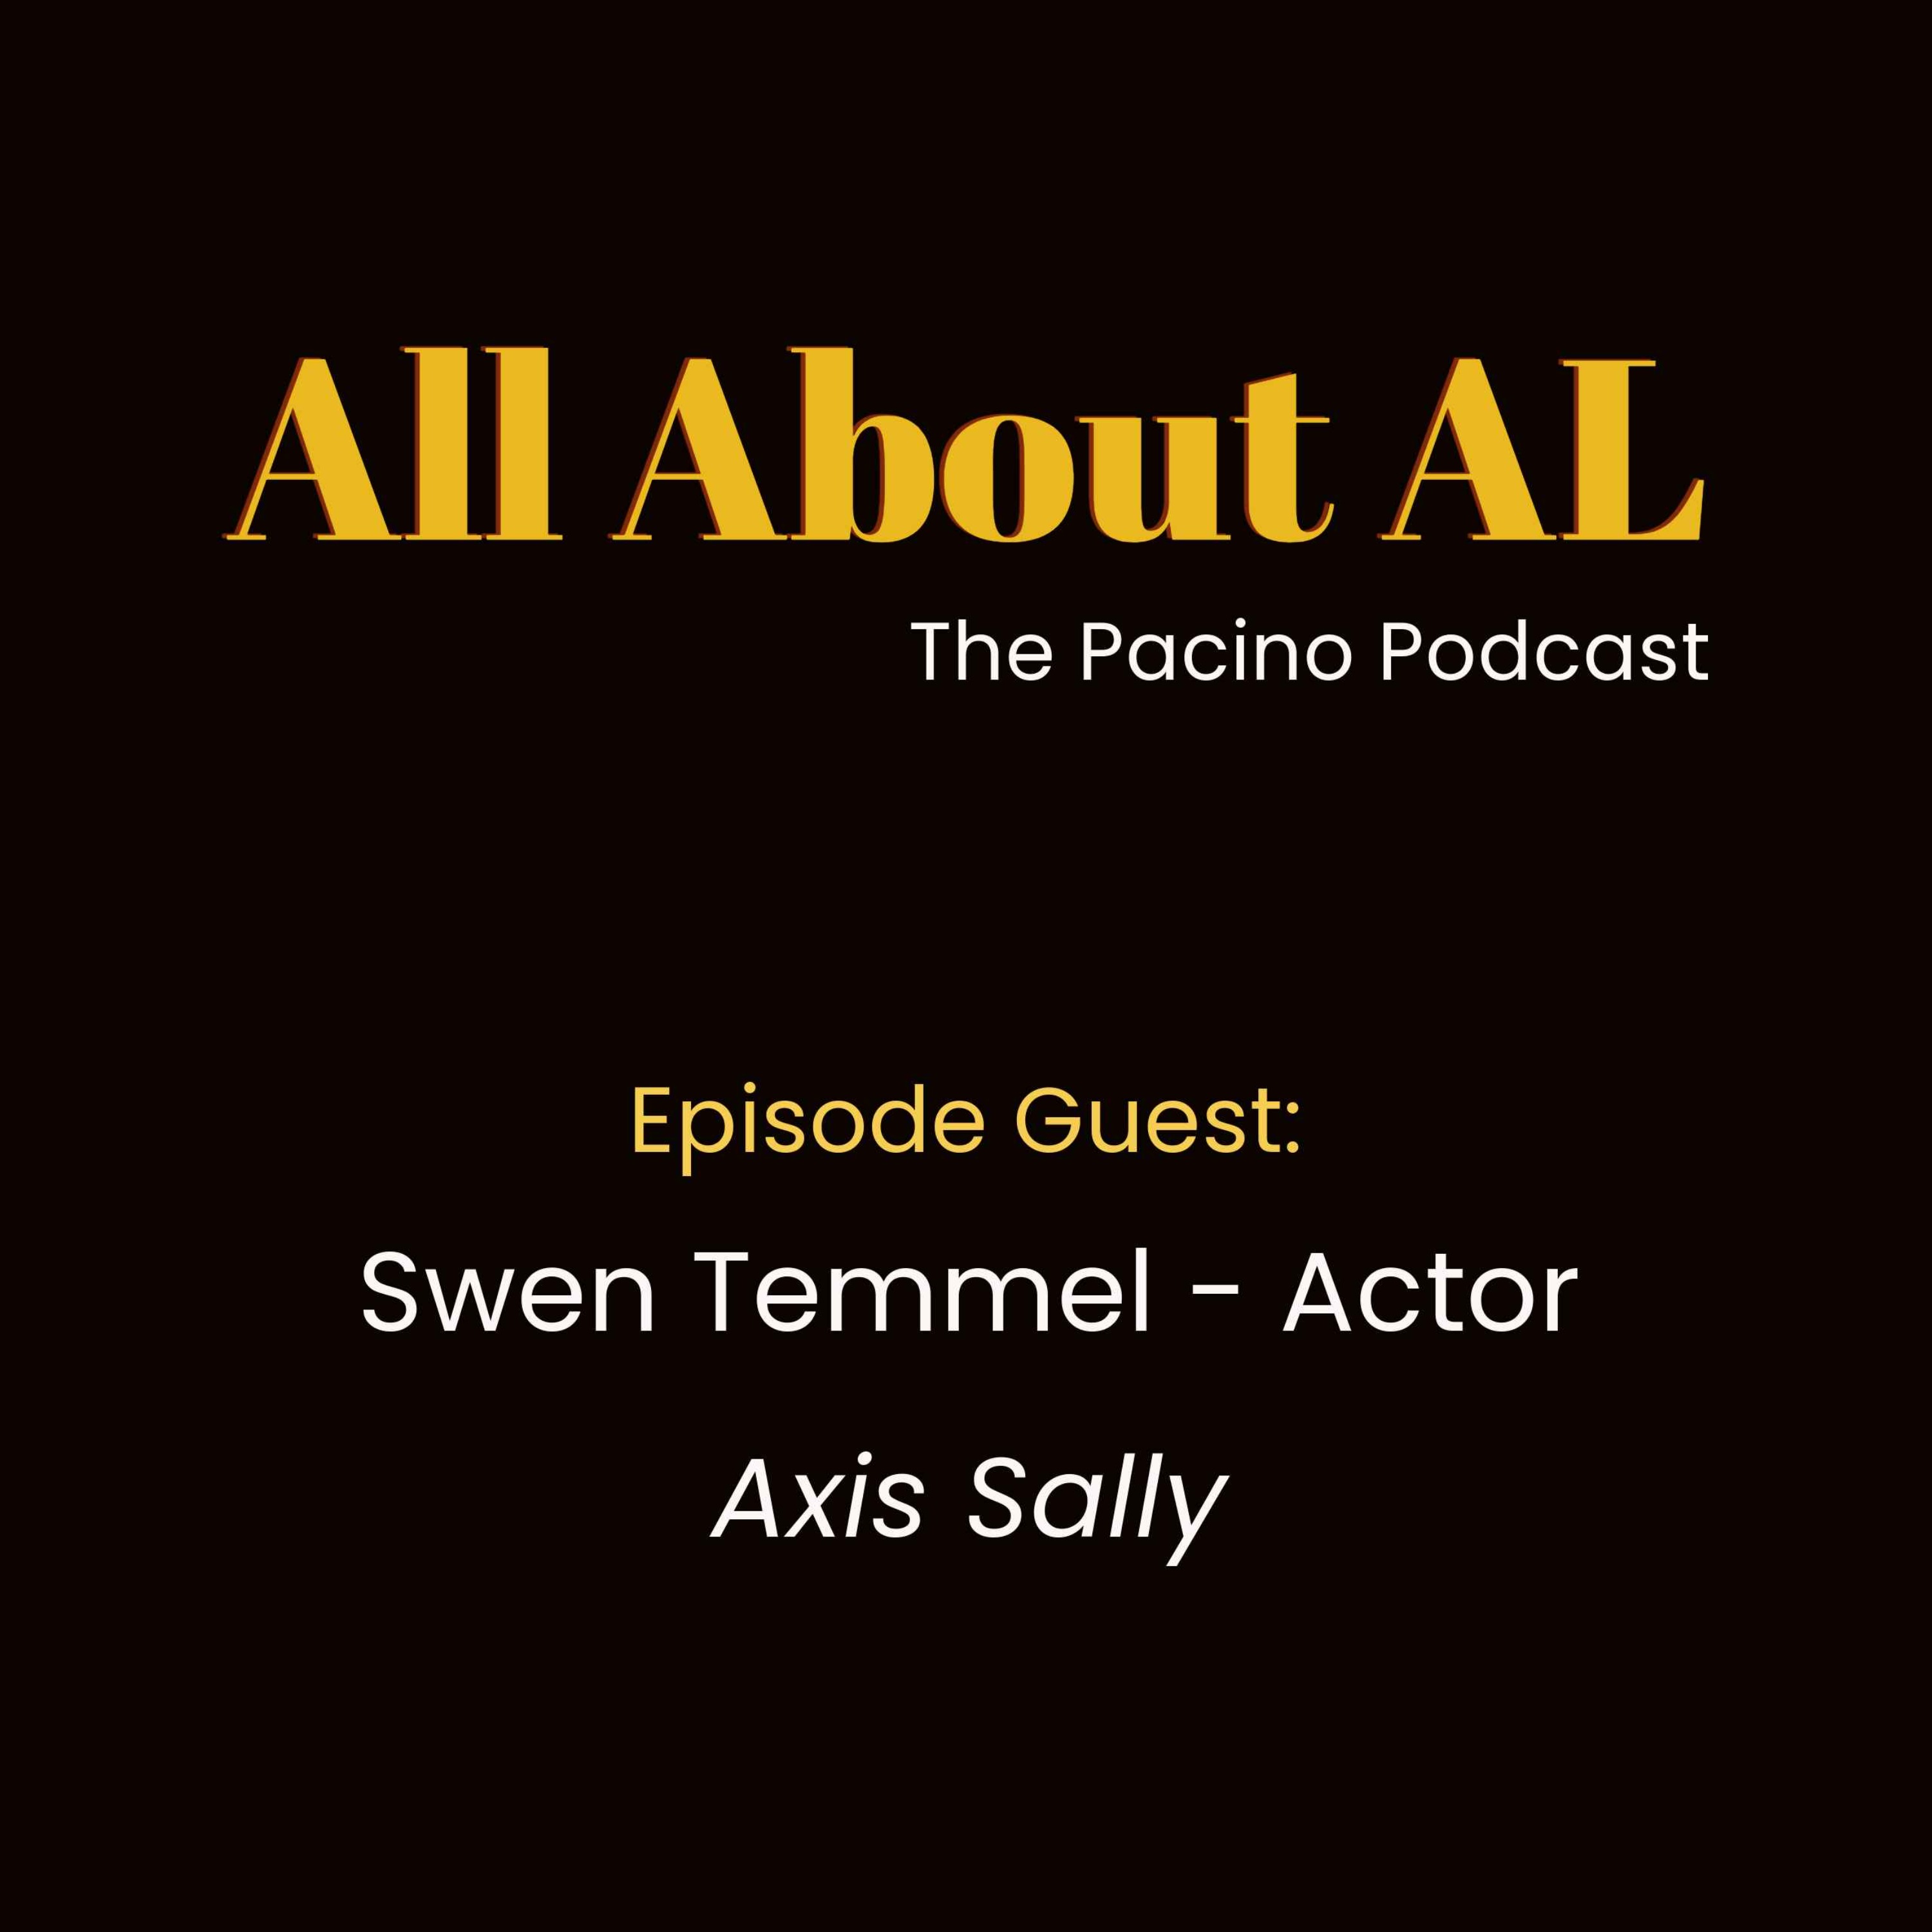 Episode 19: Axis Sally with Swen Temmel